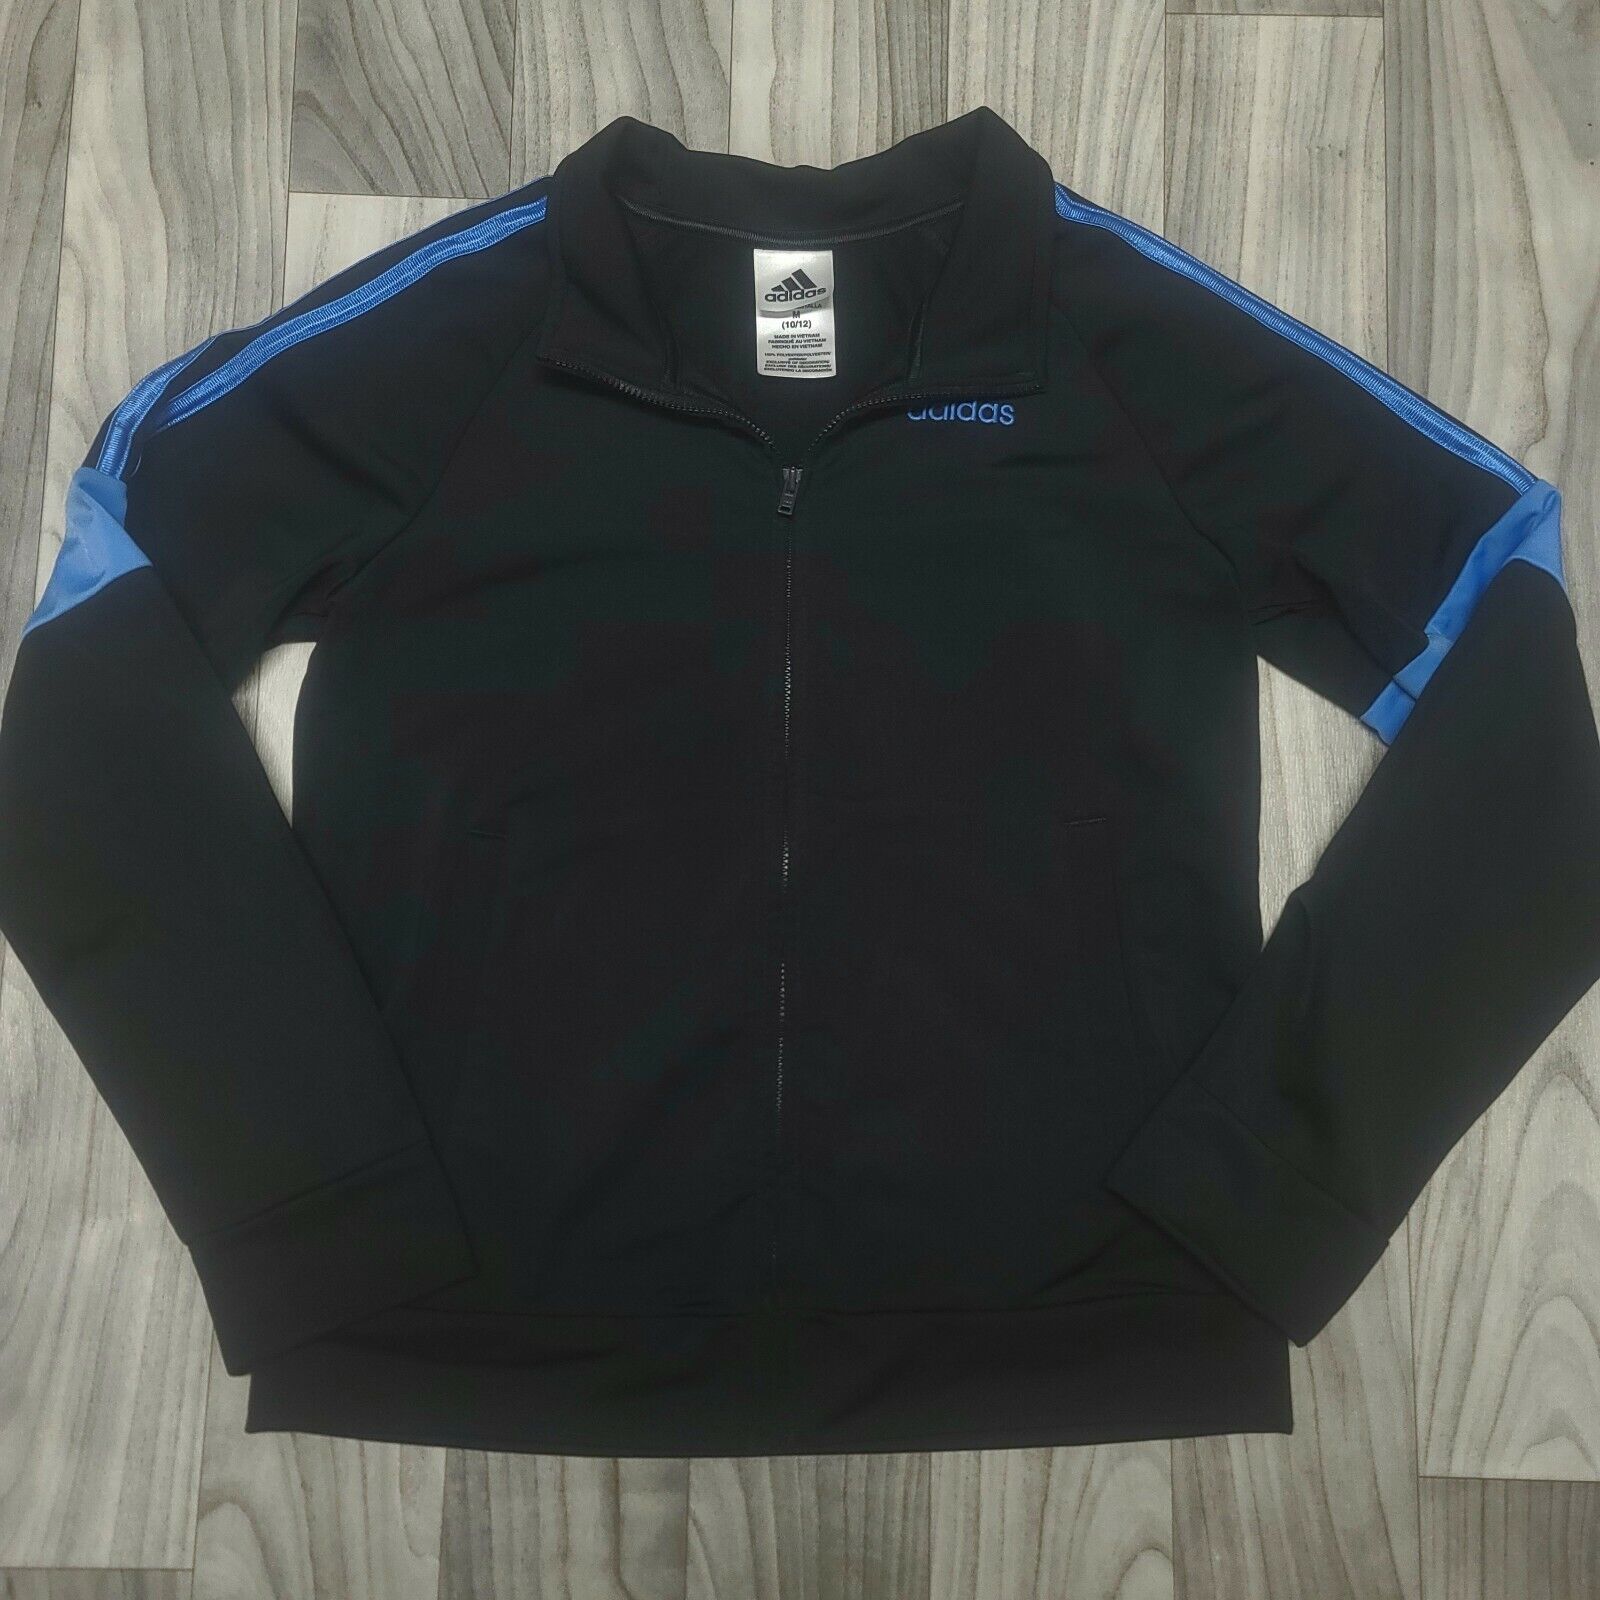 Adidas All items free shipping Zip Up Jacket Youth Black Blue Size Ultra-Cheap Deals Medium